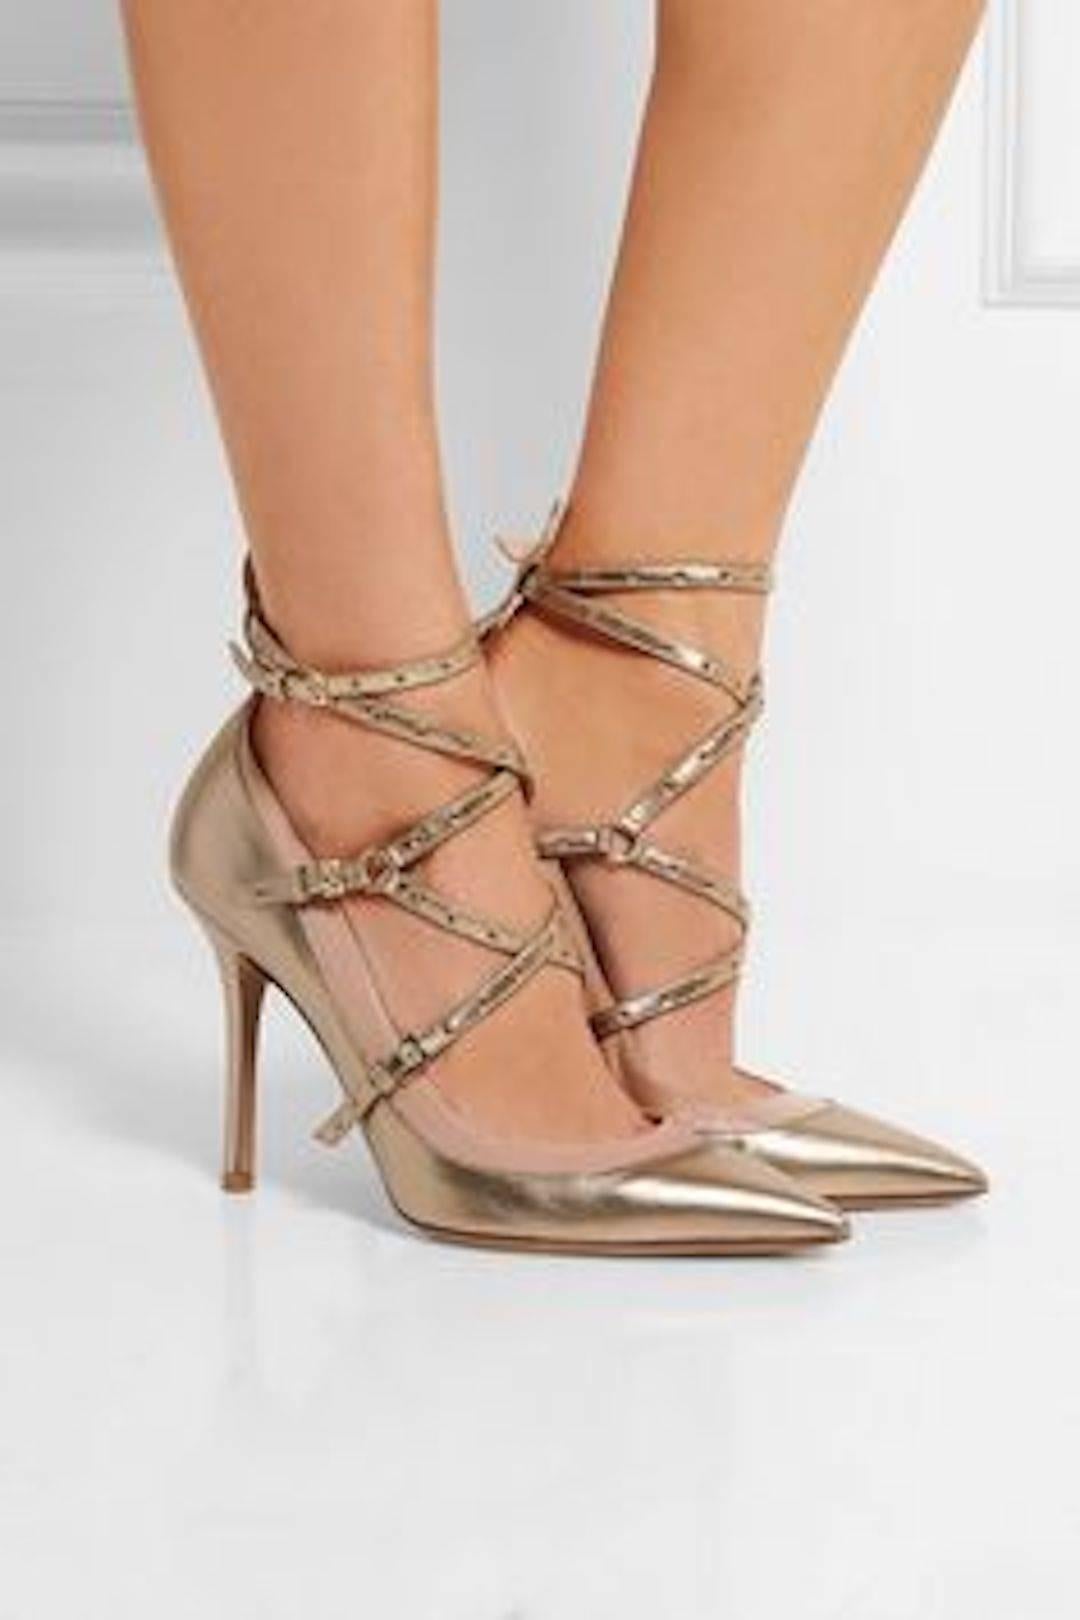 CURATOR'S NOTES  

Valentino New Gold Bronze Leather Cut Out Strappy Sandals Heels in Box   

Size IT 36.5
Leather
Ankle buckle closure 
Made in Italy 
Heel height 4"
Includes original Valentino box